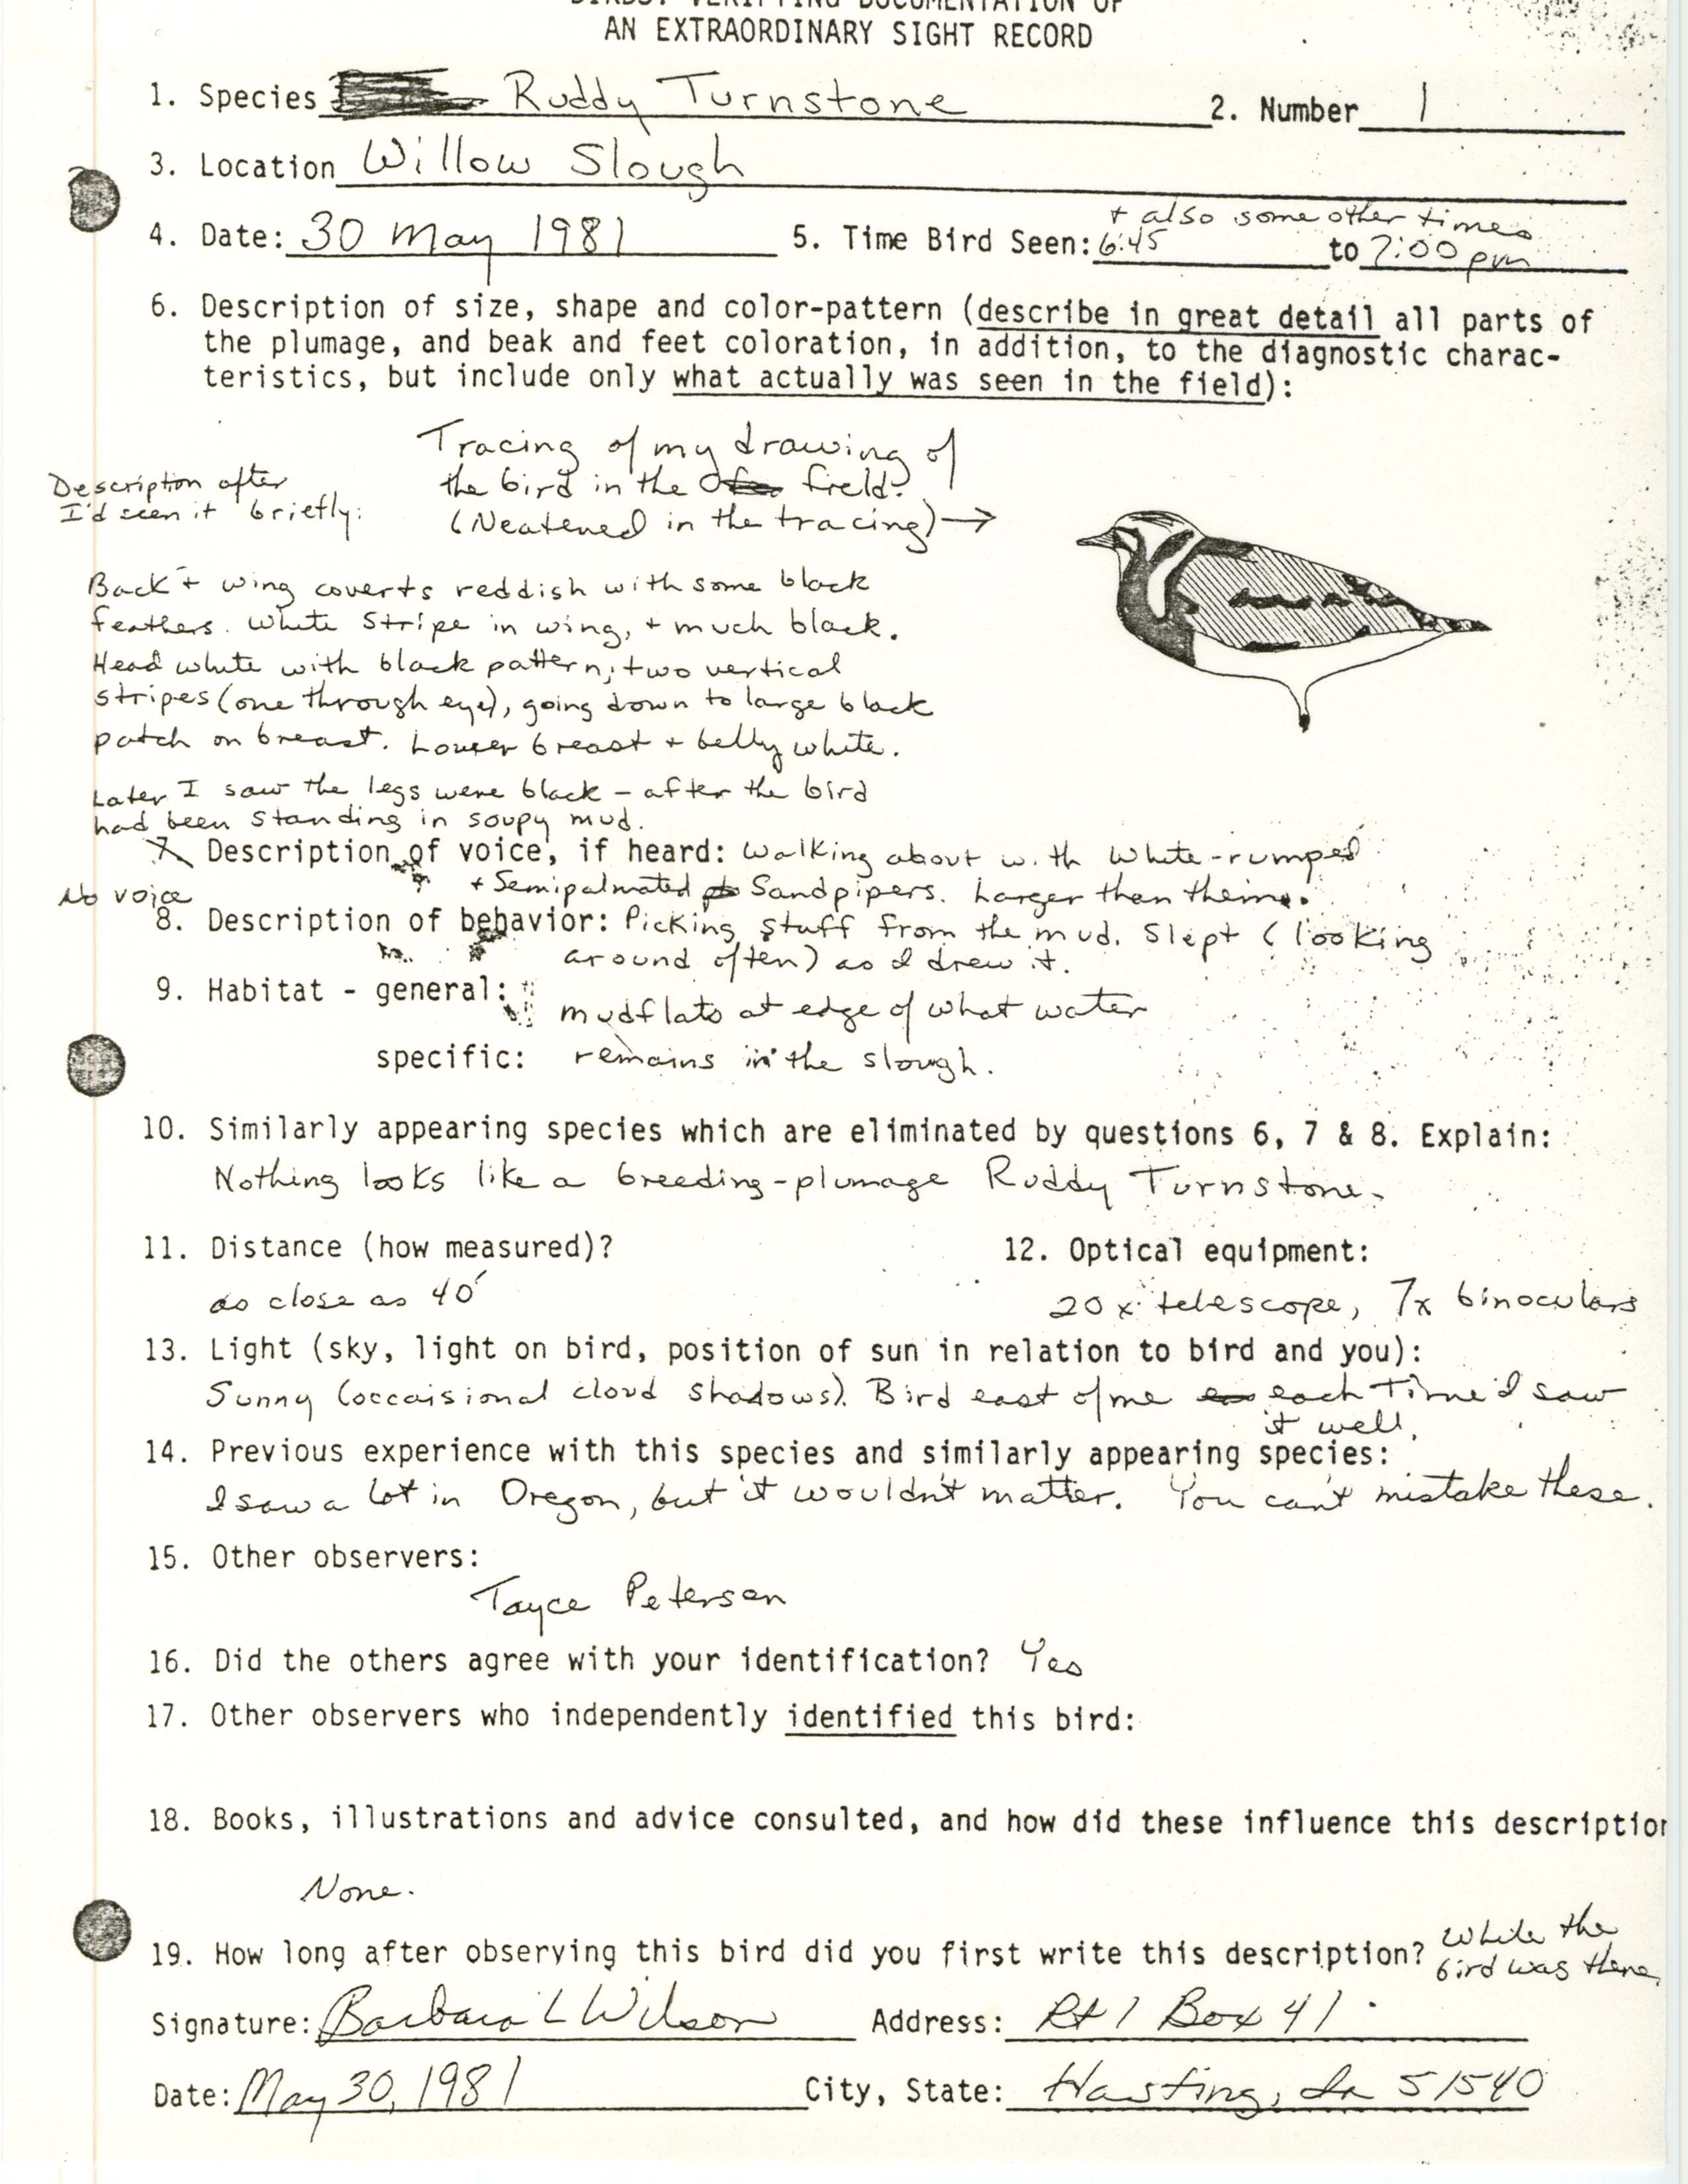 Rare bird documentation form for Ruddy Turnstone at Willow Slough, 1981